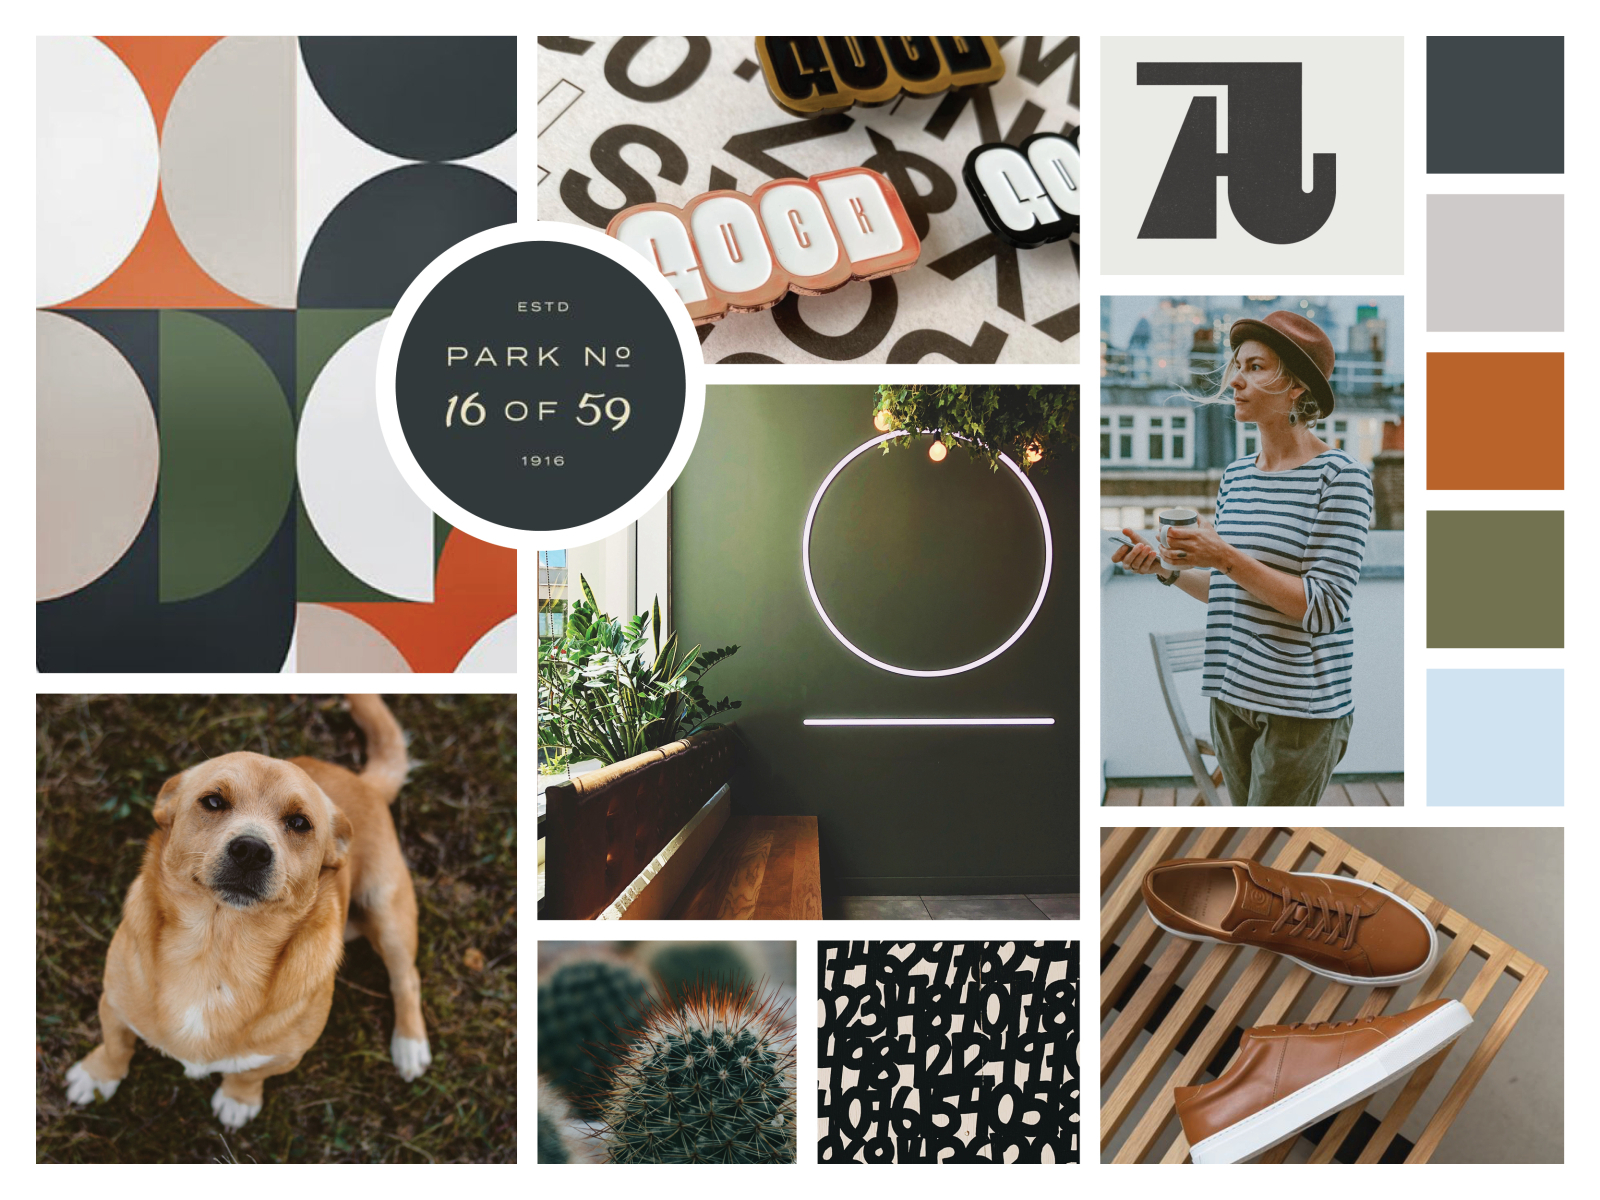 Moodboard - Inviting and Personal by chris may sikora on Dribbble